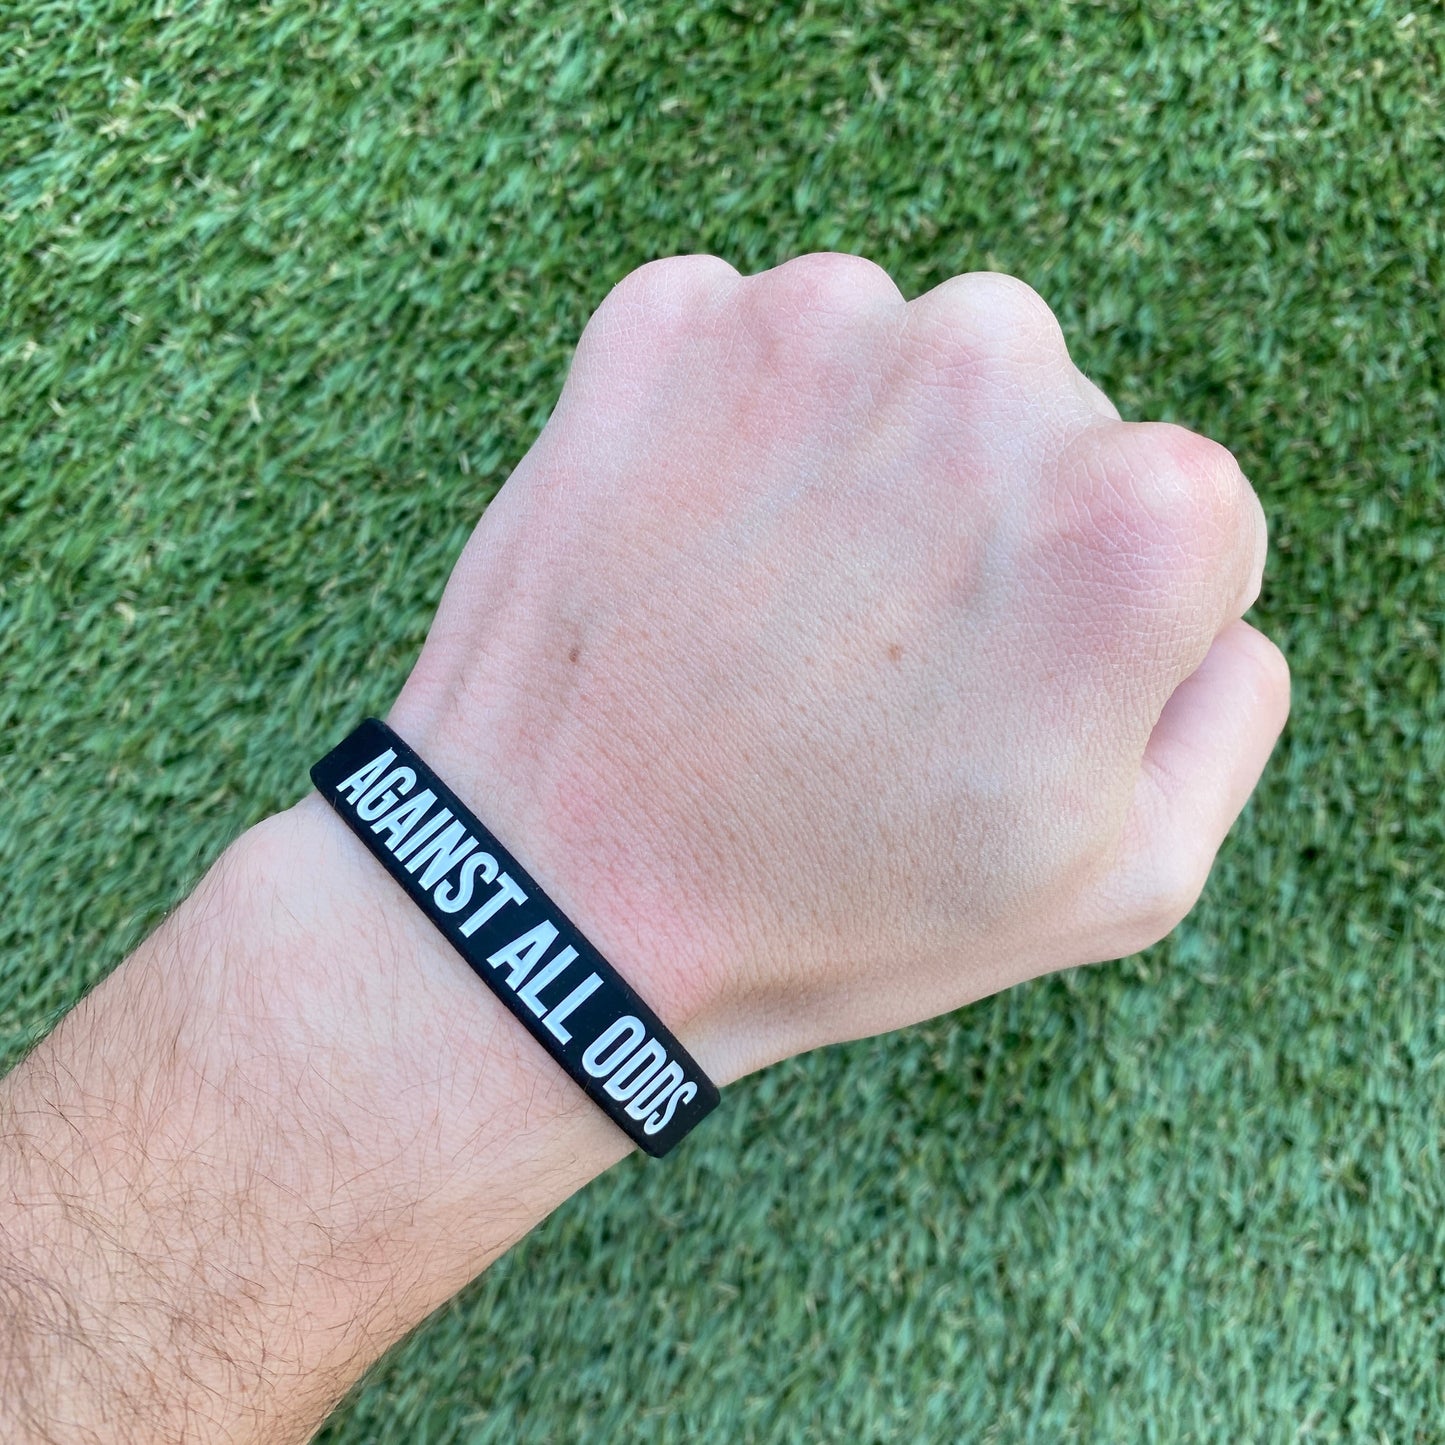 AGAINST ALL ODDS Wristband - Southern Grace Creations